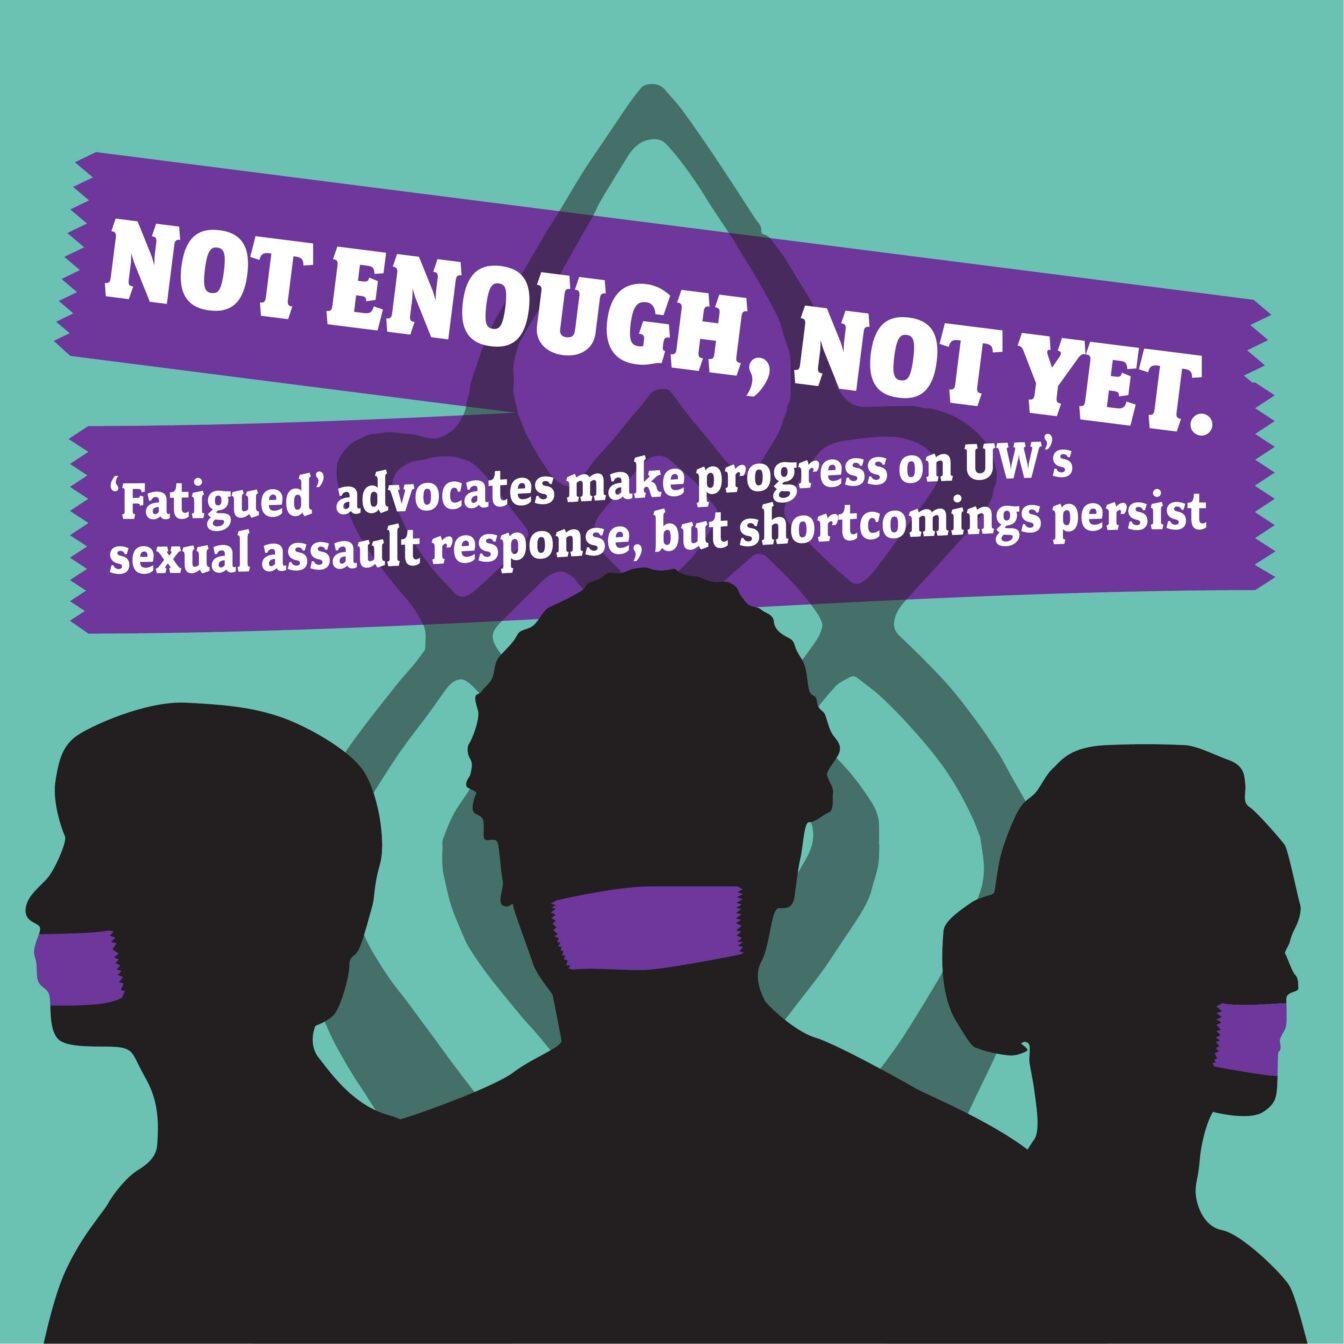 Not+enough%2C+not+yet%3A+UW+makes+progress+on+sexual+assault+response%2C+but+shortcomings+persist